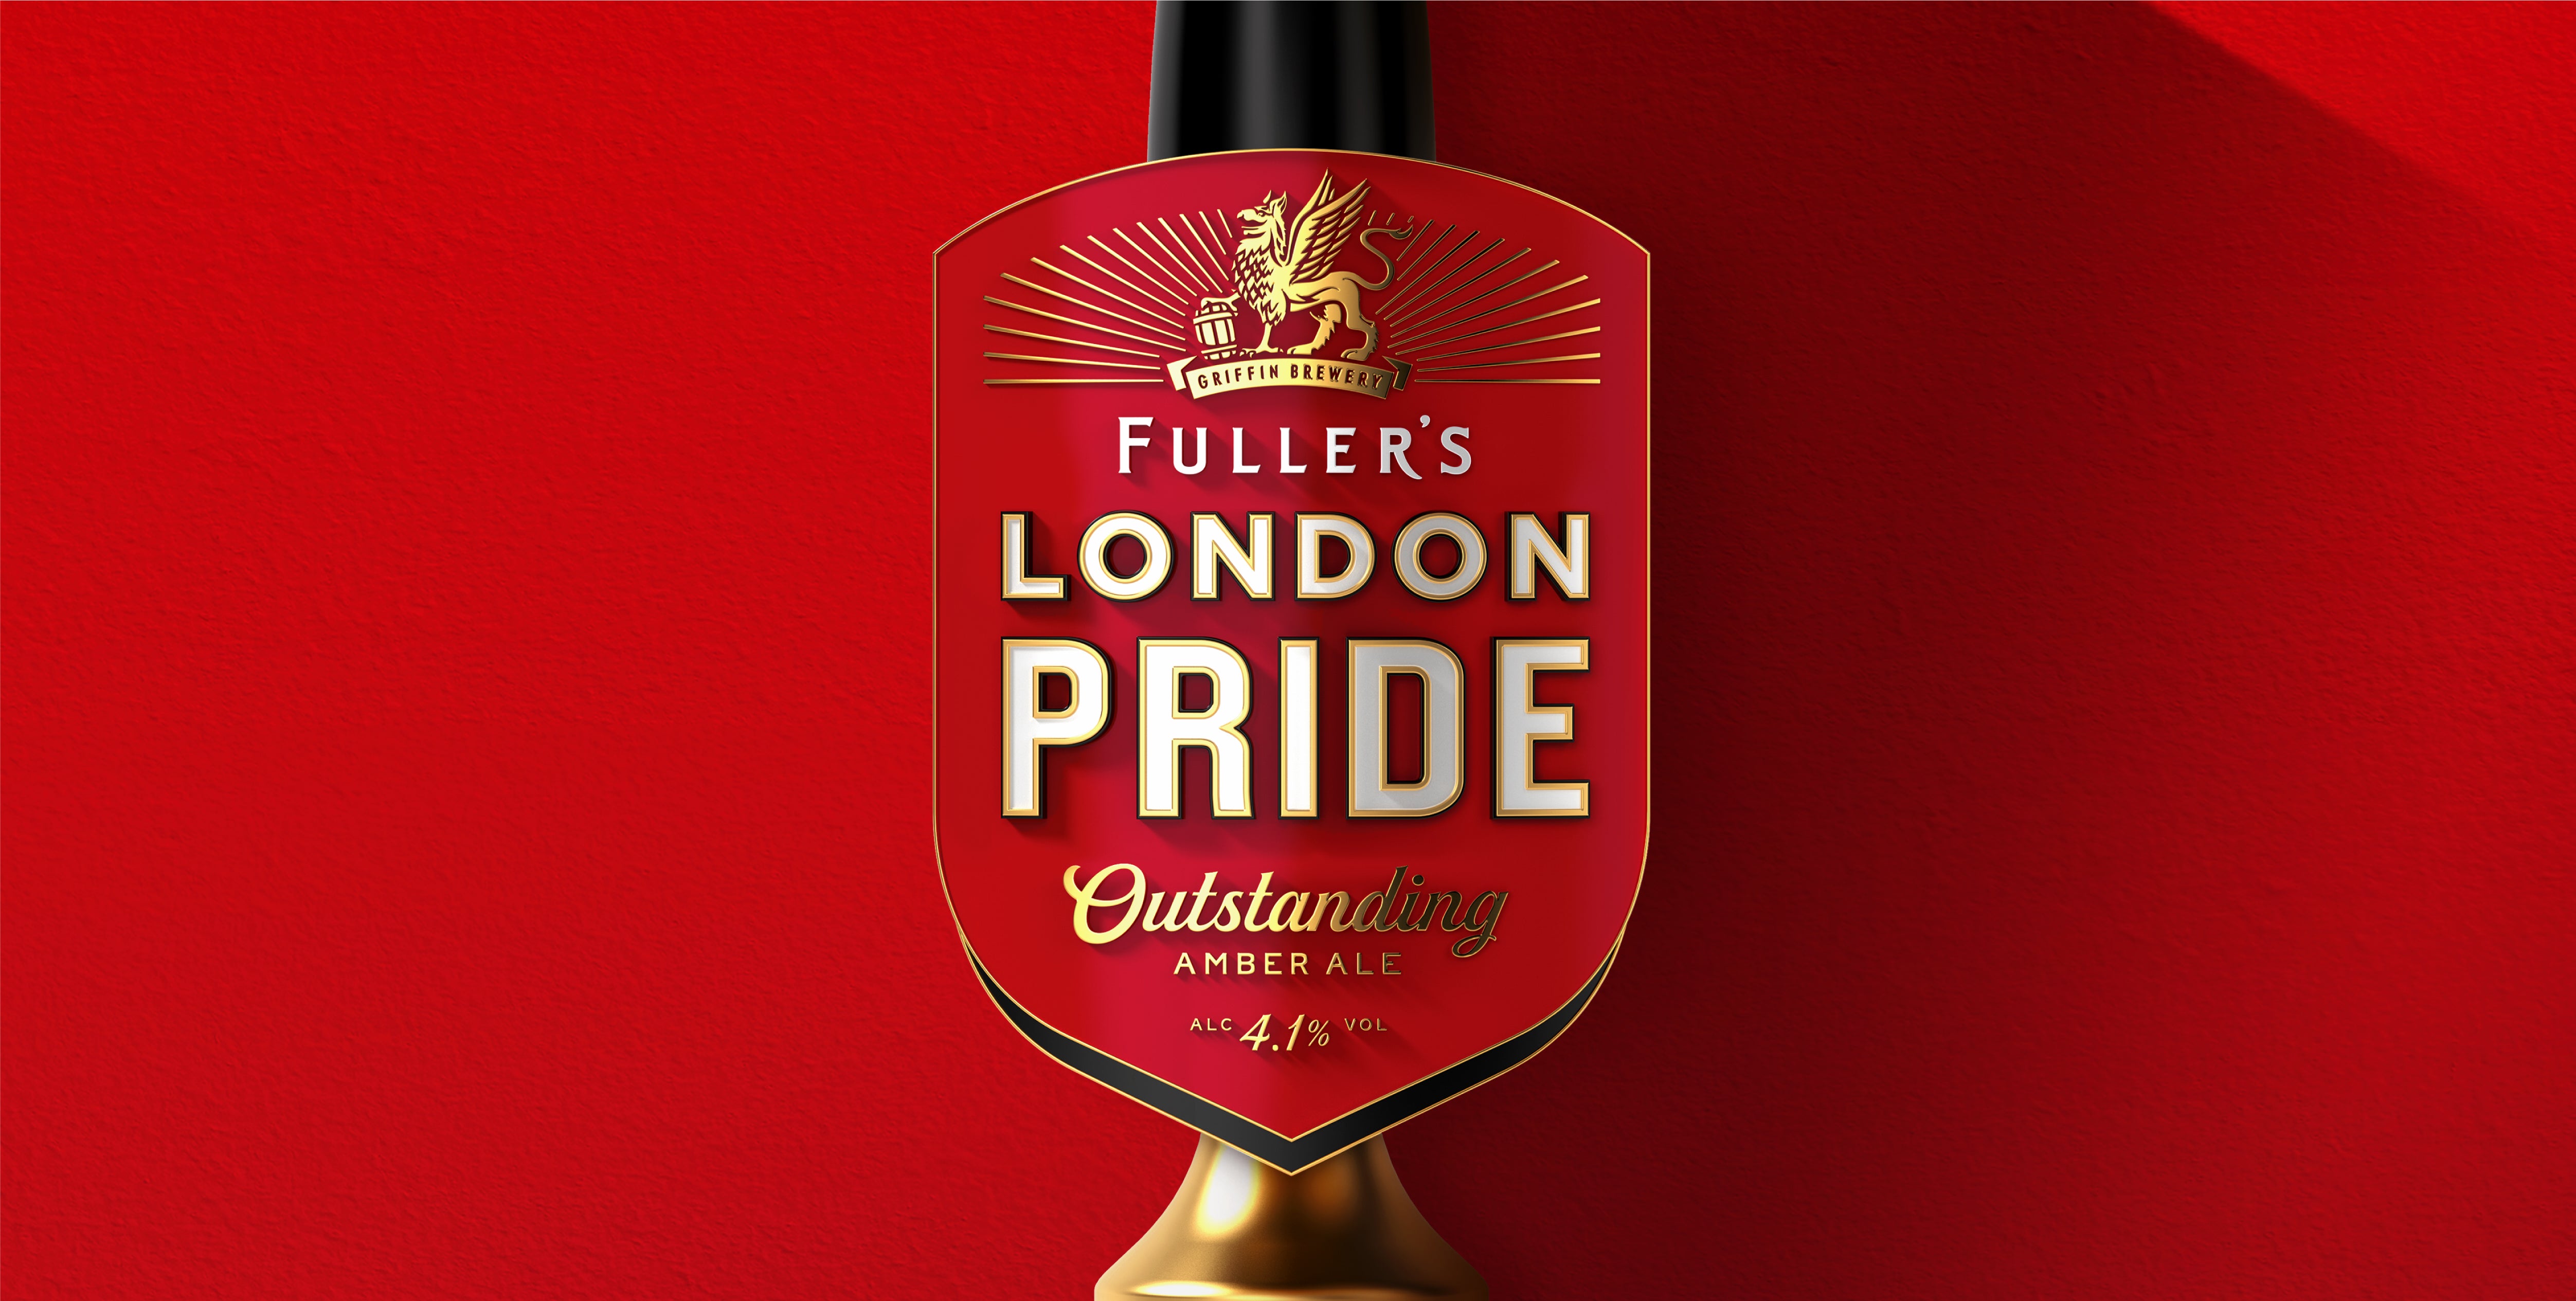 London Pride Outstanding Amber Ale 0,5l-  Englisches Ale mit 4,7% Vol.